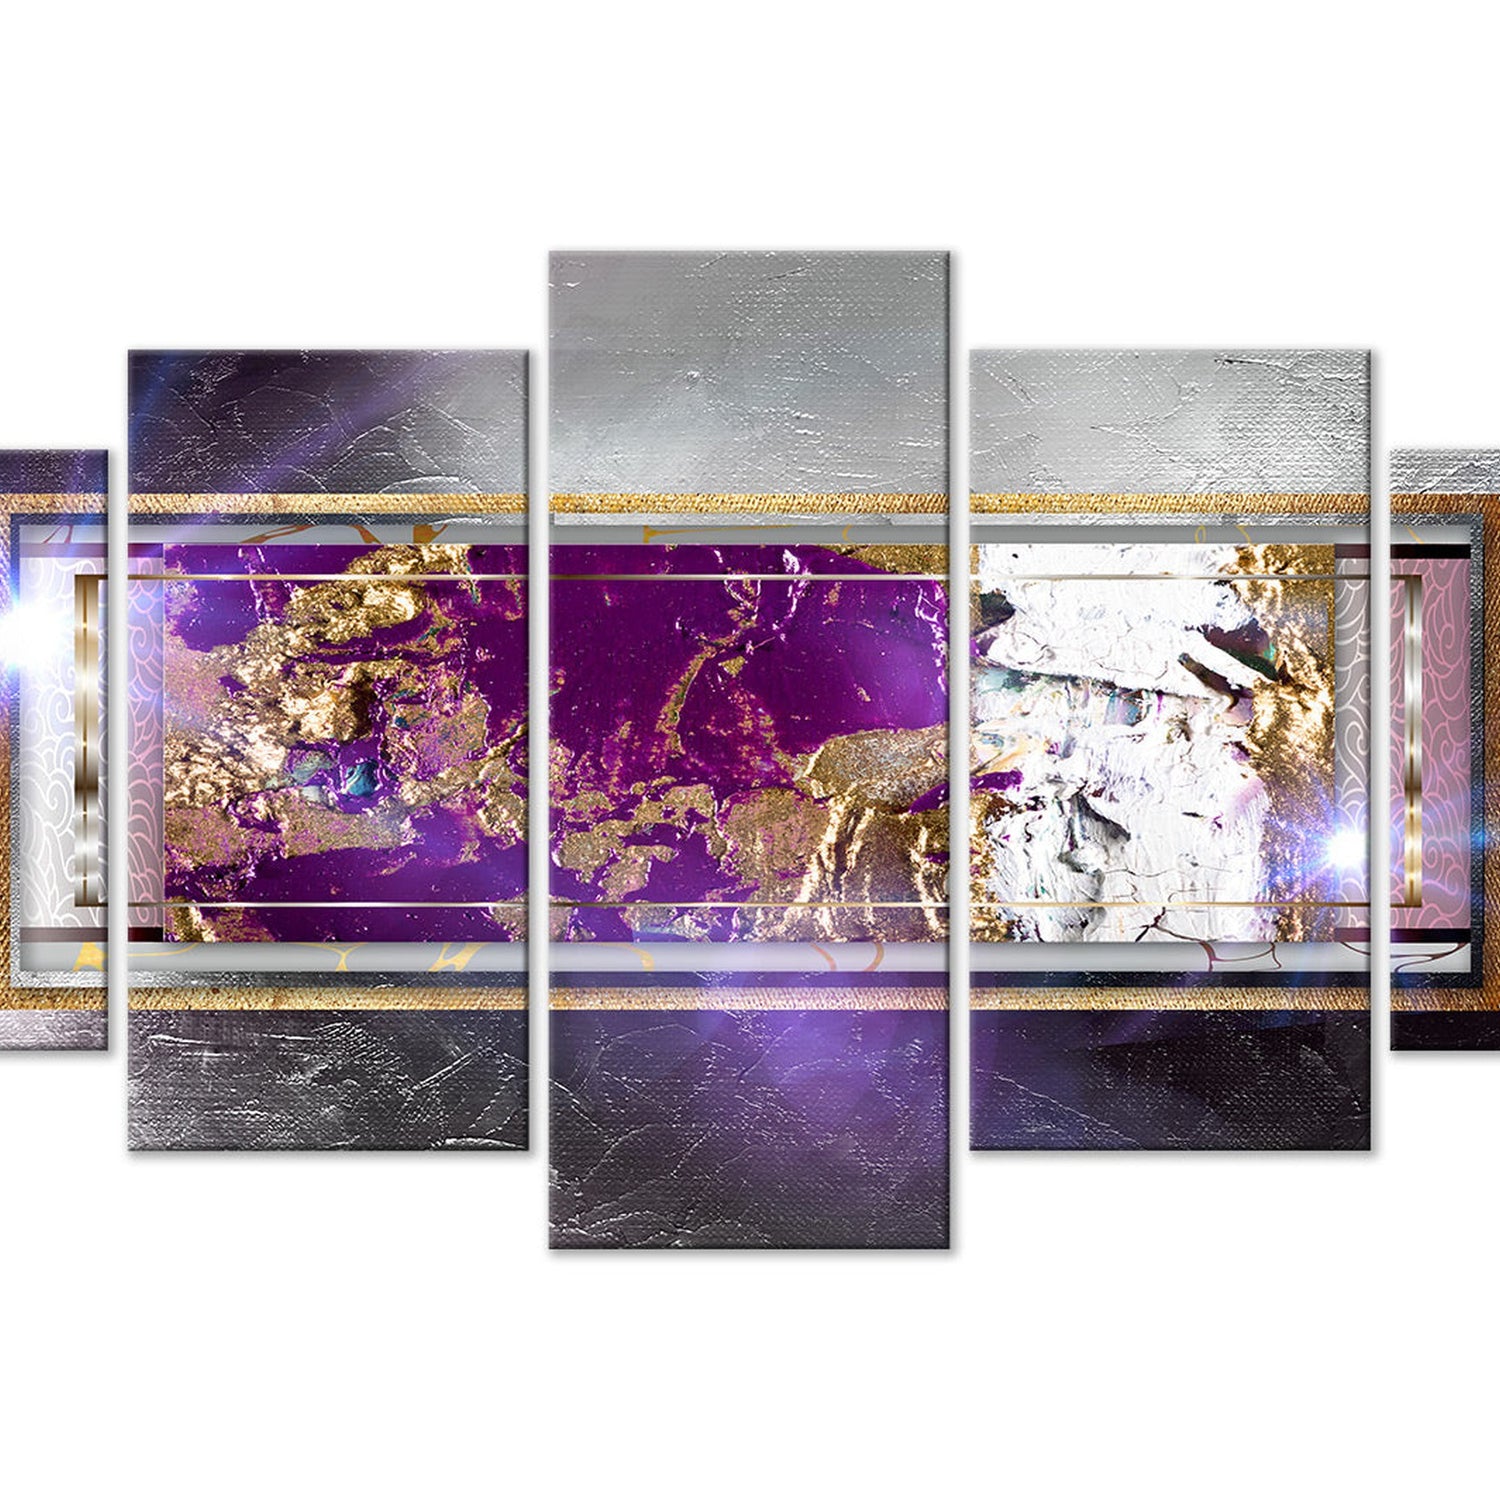 Glamour Canvas Wall Art - Golden Reflection Wide - 5 Pieces